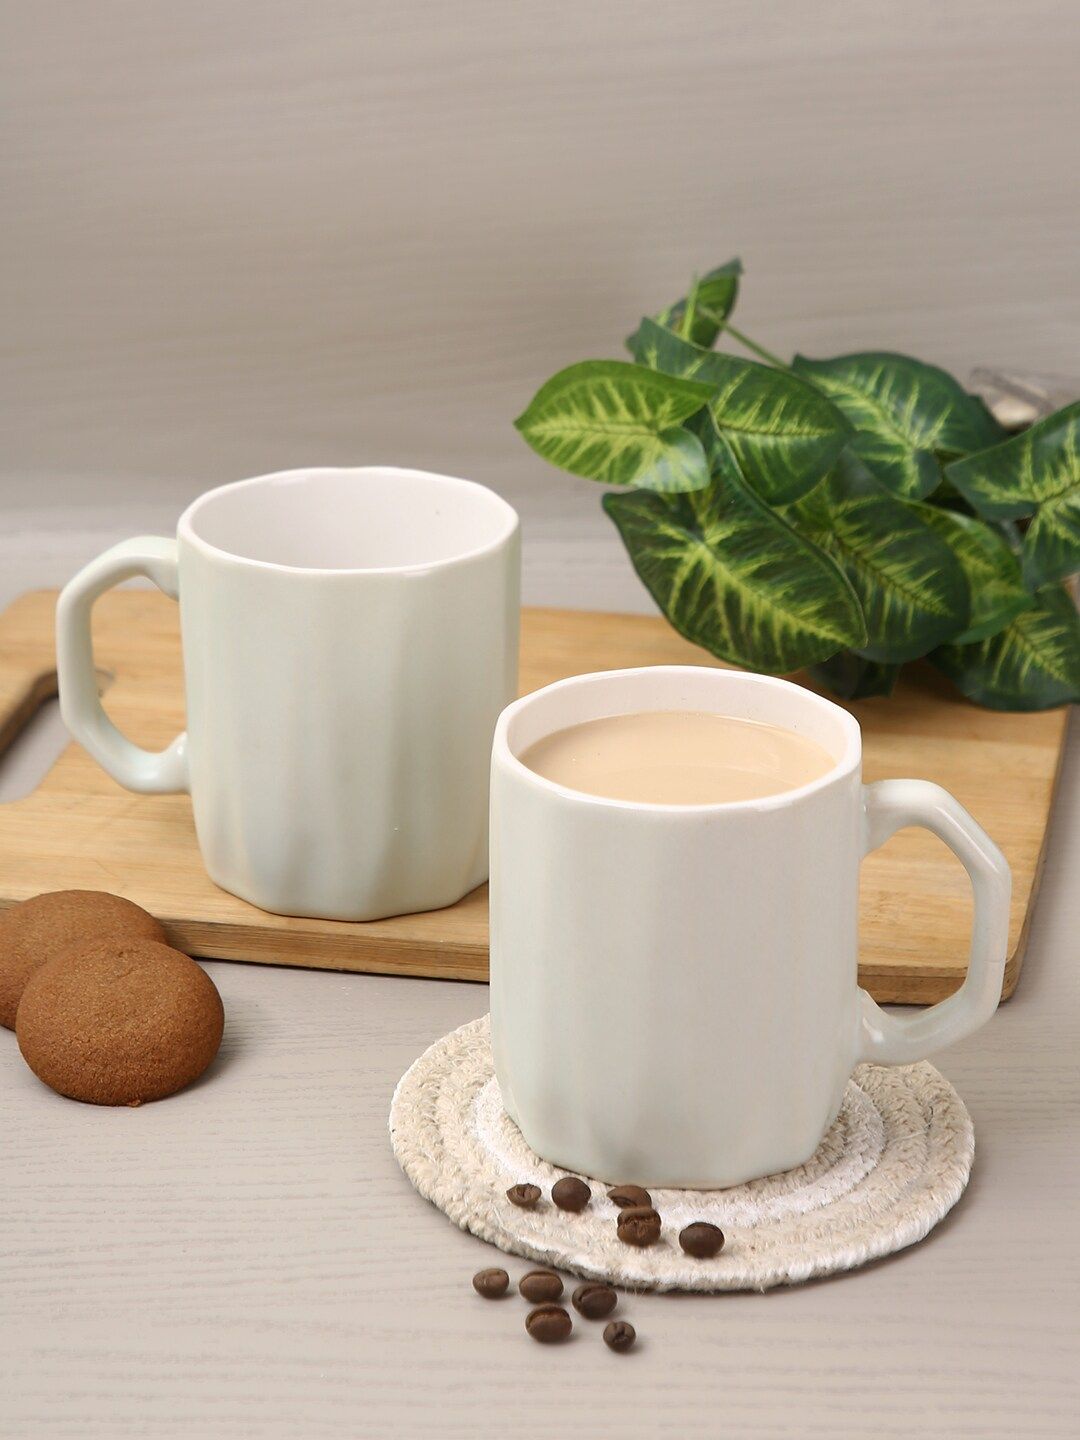 Aapno Rajasthan Set Of 4 White Solid Ceramic Glossy Coffee Mugs Price in India